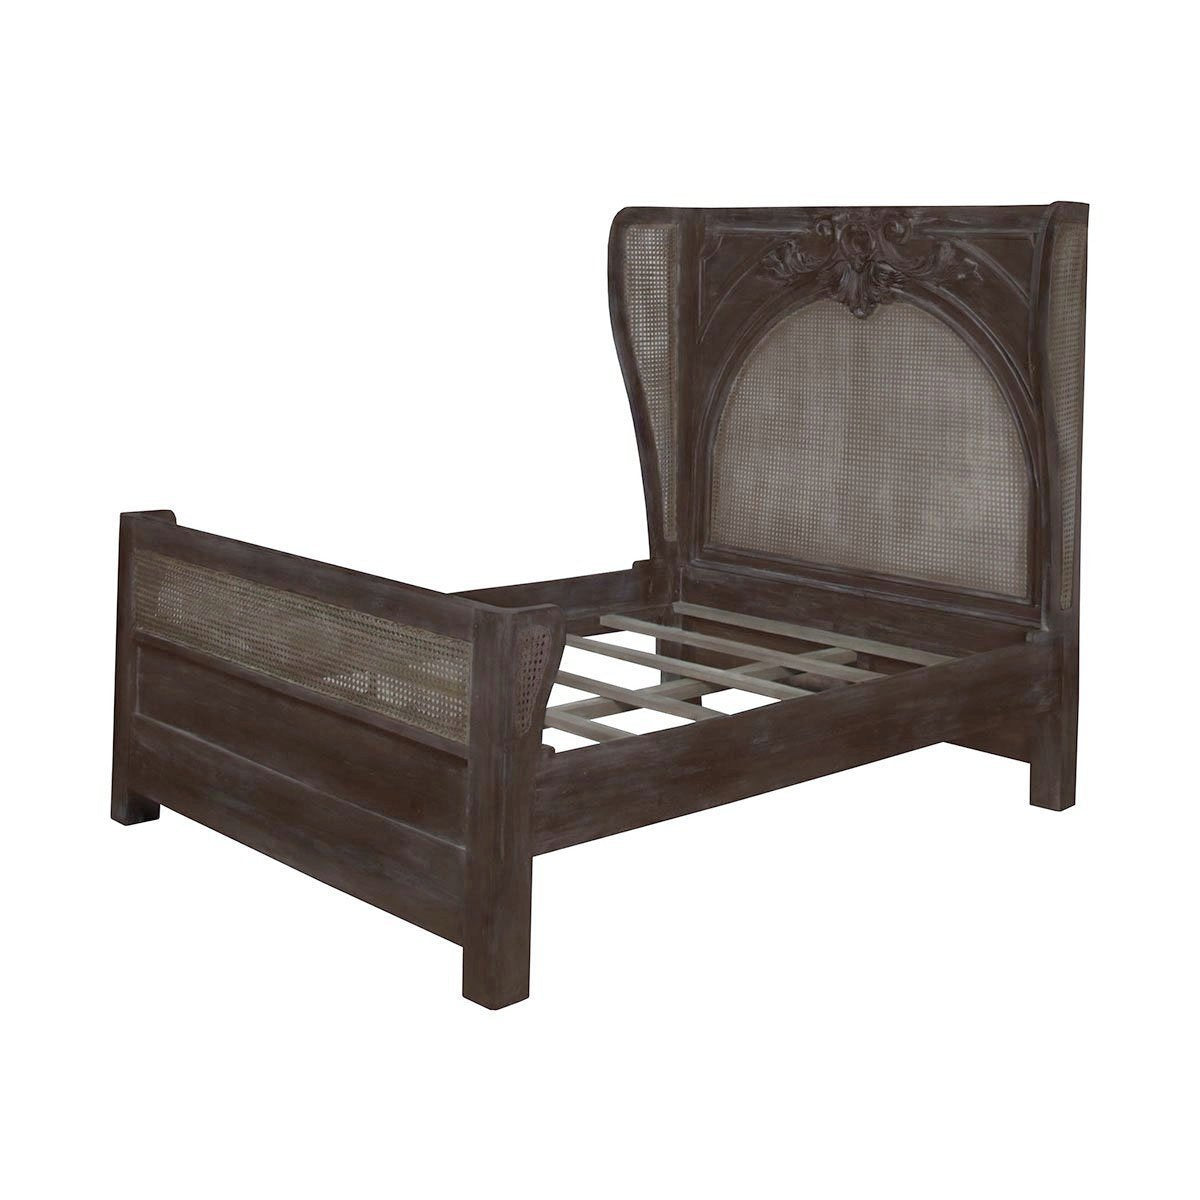 Caned Acanthus Bed